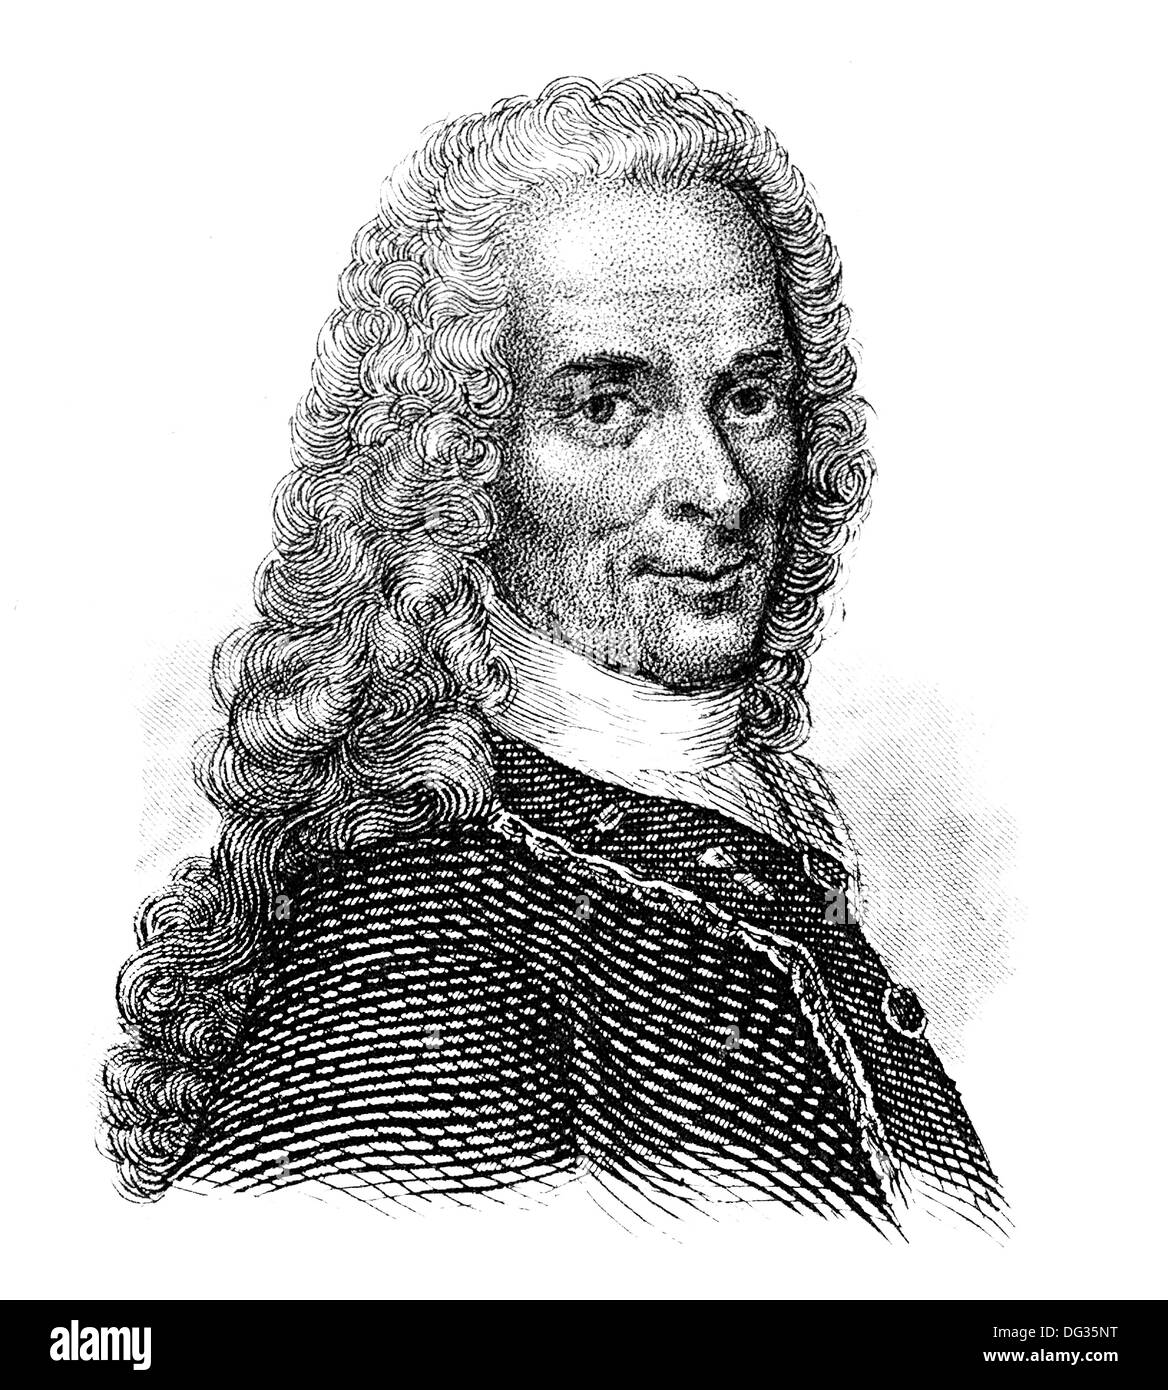 Voltaire or François Marie Arouet, 1694 - 1778, an author of the French and European Enlightenment, Stock Photo